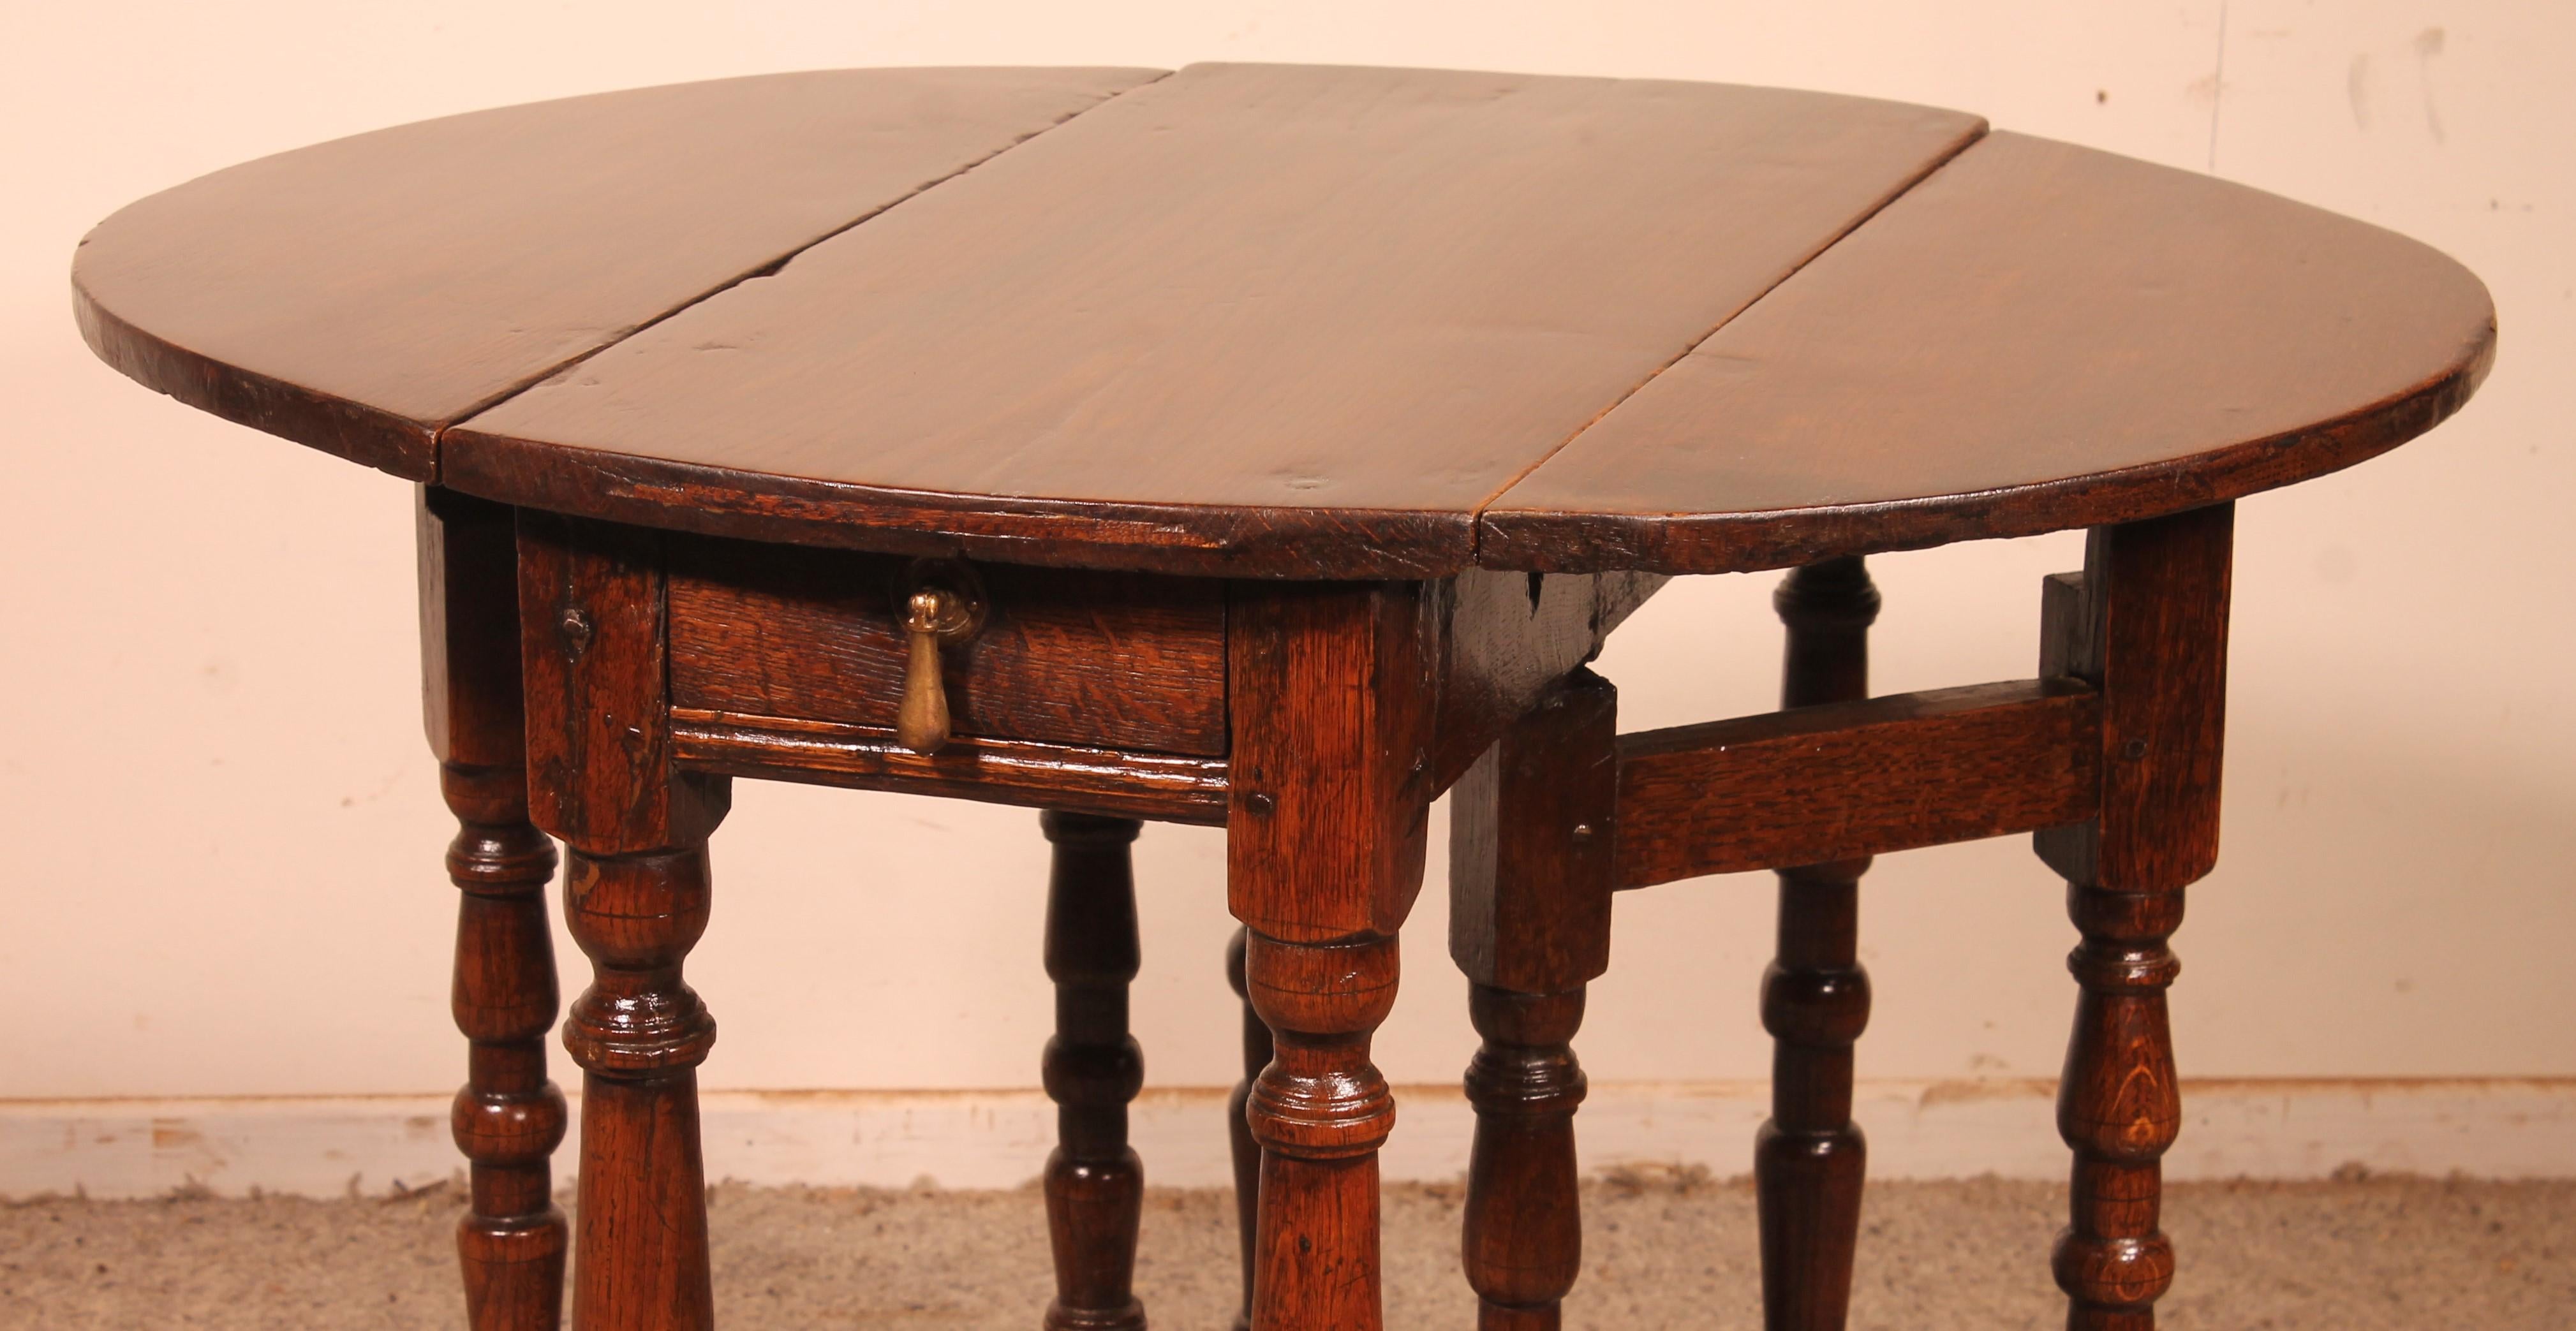 Lovely little oak table from the beginning of the 18th century from England called Gateleg table

Very nice little table which has a superb turning and a drawer in the belt

the table can be used as an decorative table, as a small closed console